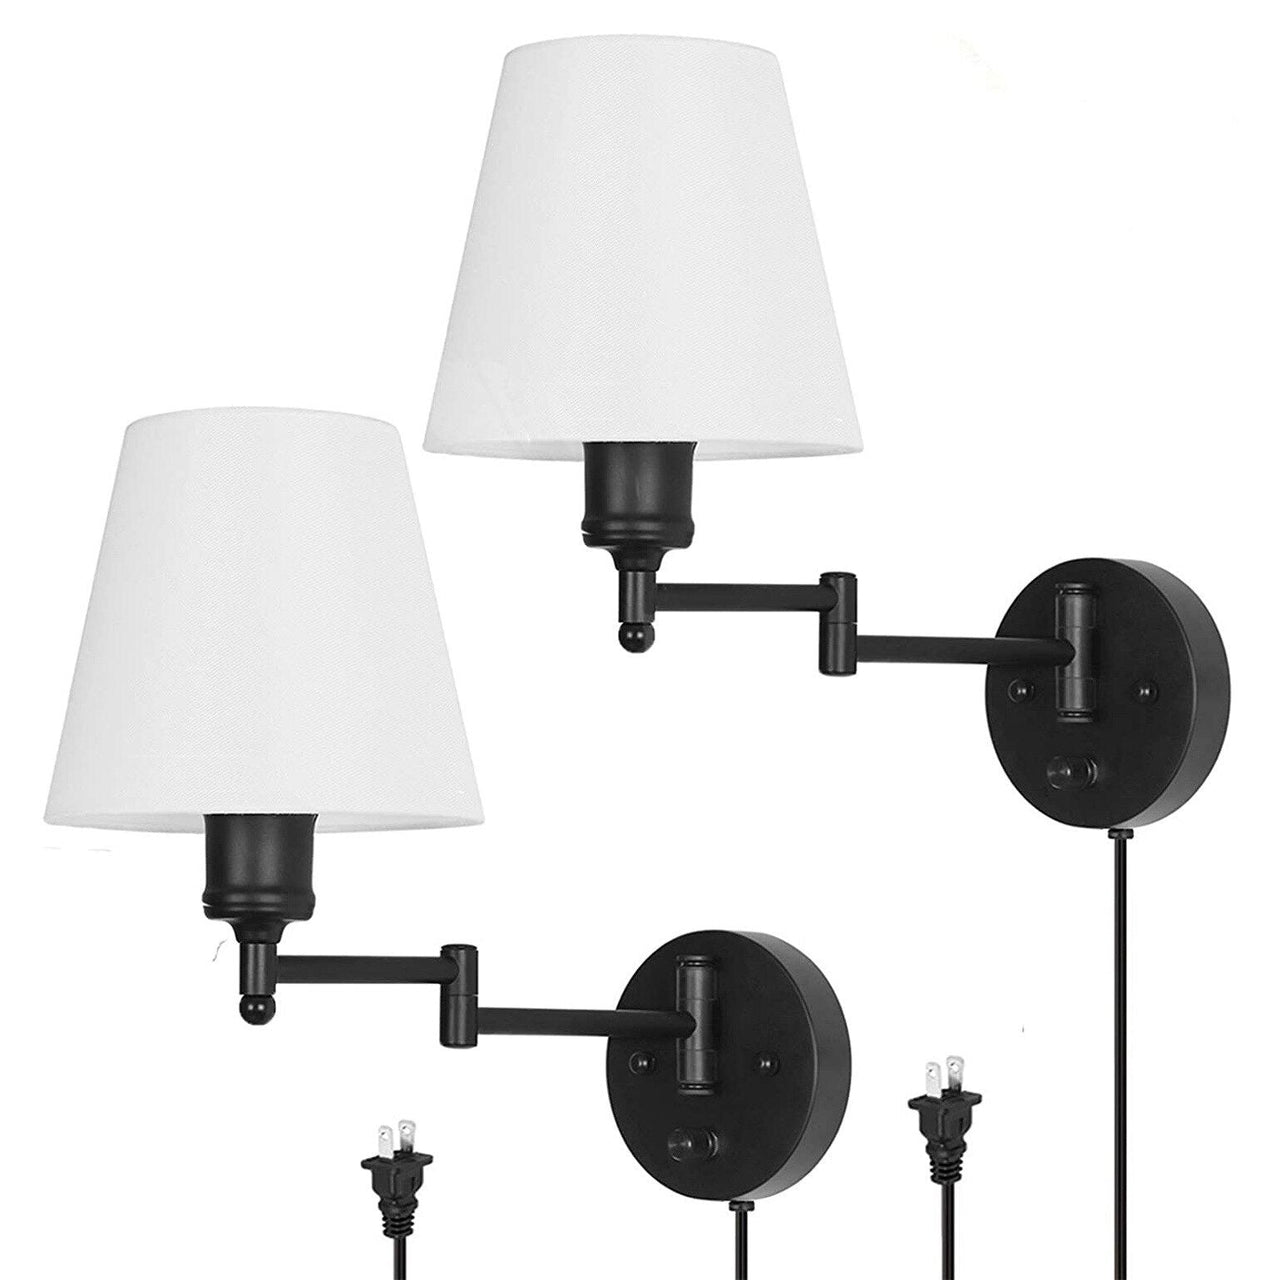 LED American Wall Lamp with Folding Swing Arm - Casatrail.com